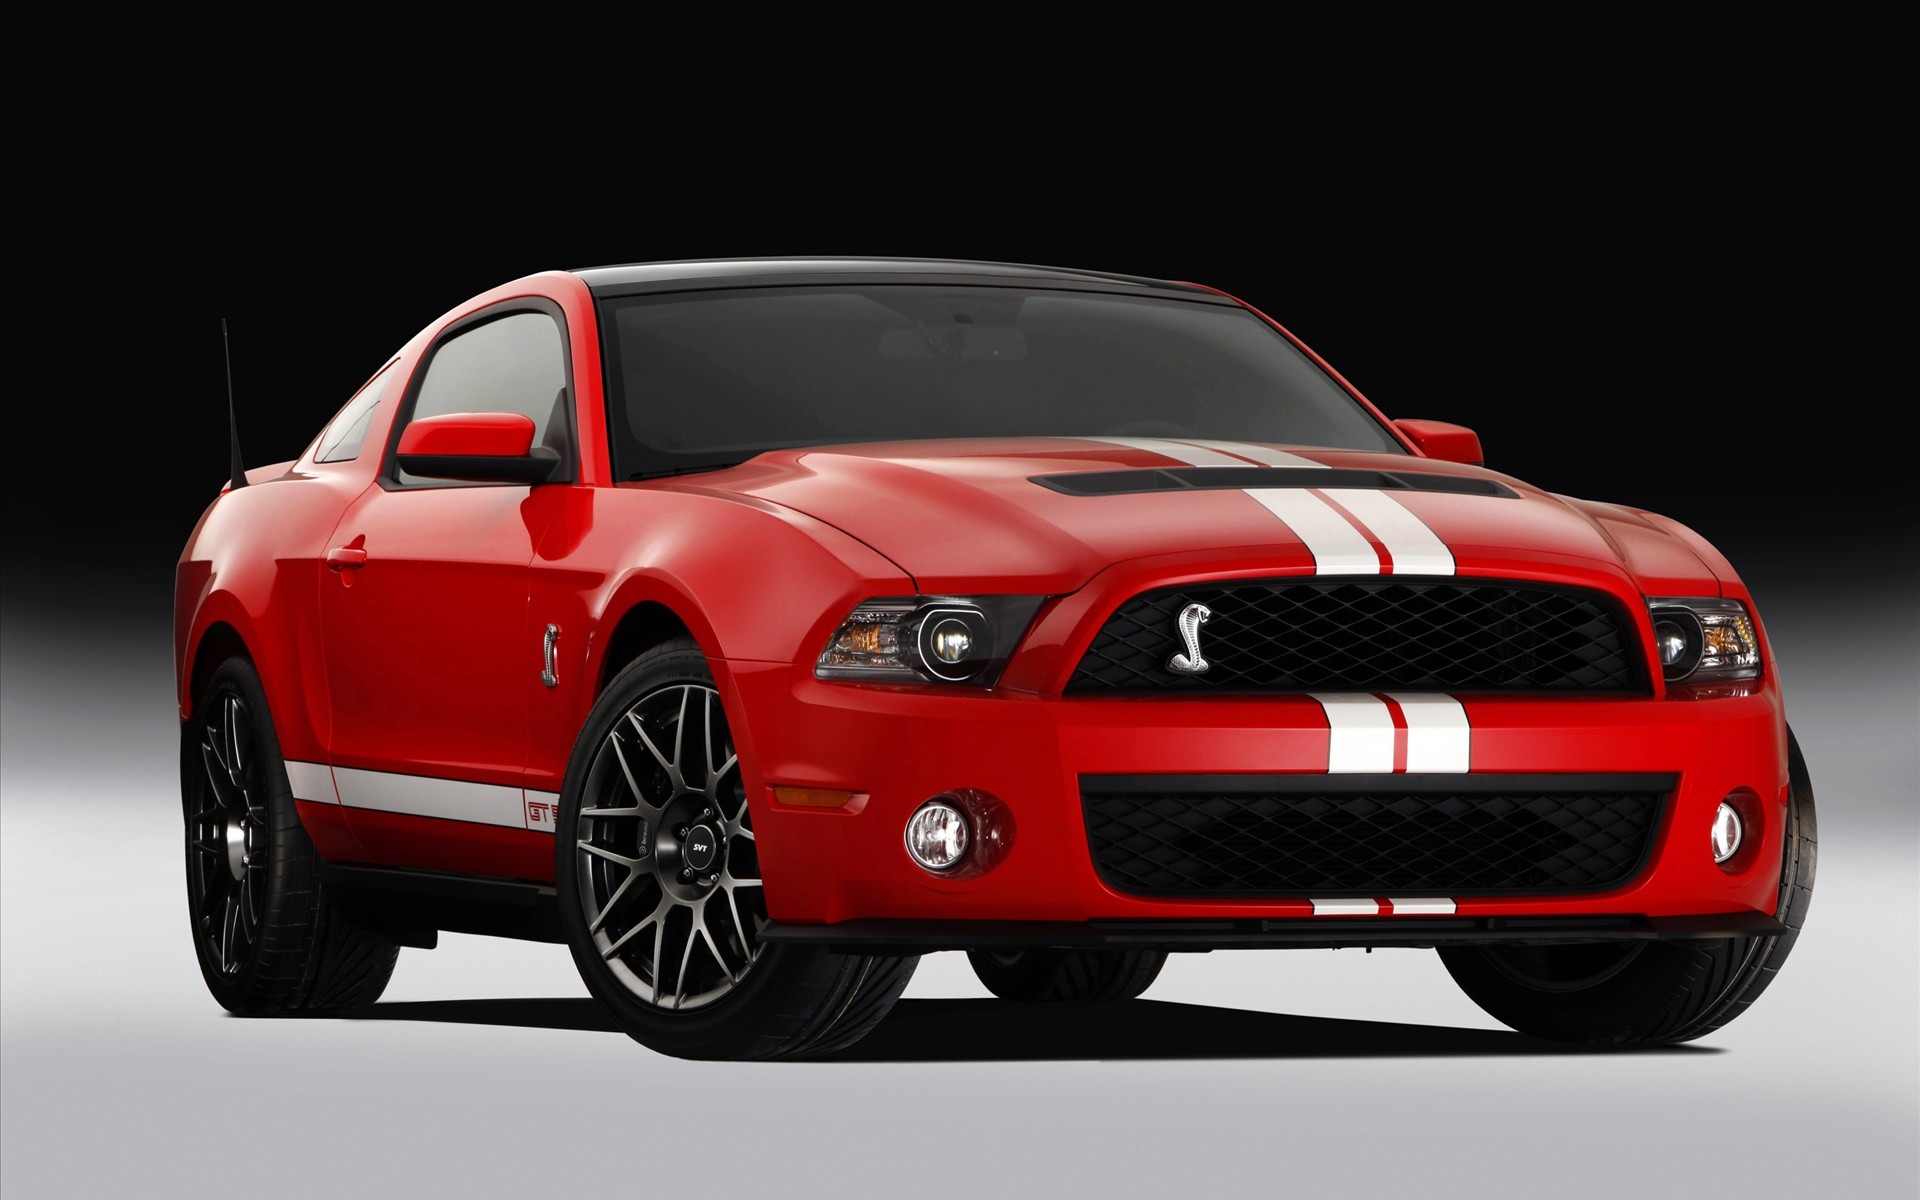 Ford Mustang GT500 Wallpapers #1 - 1920x1200